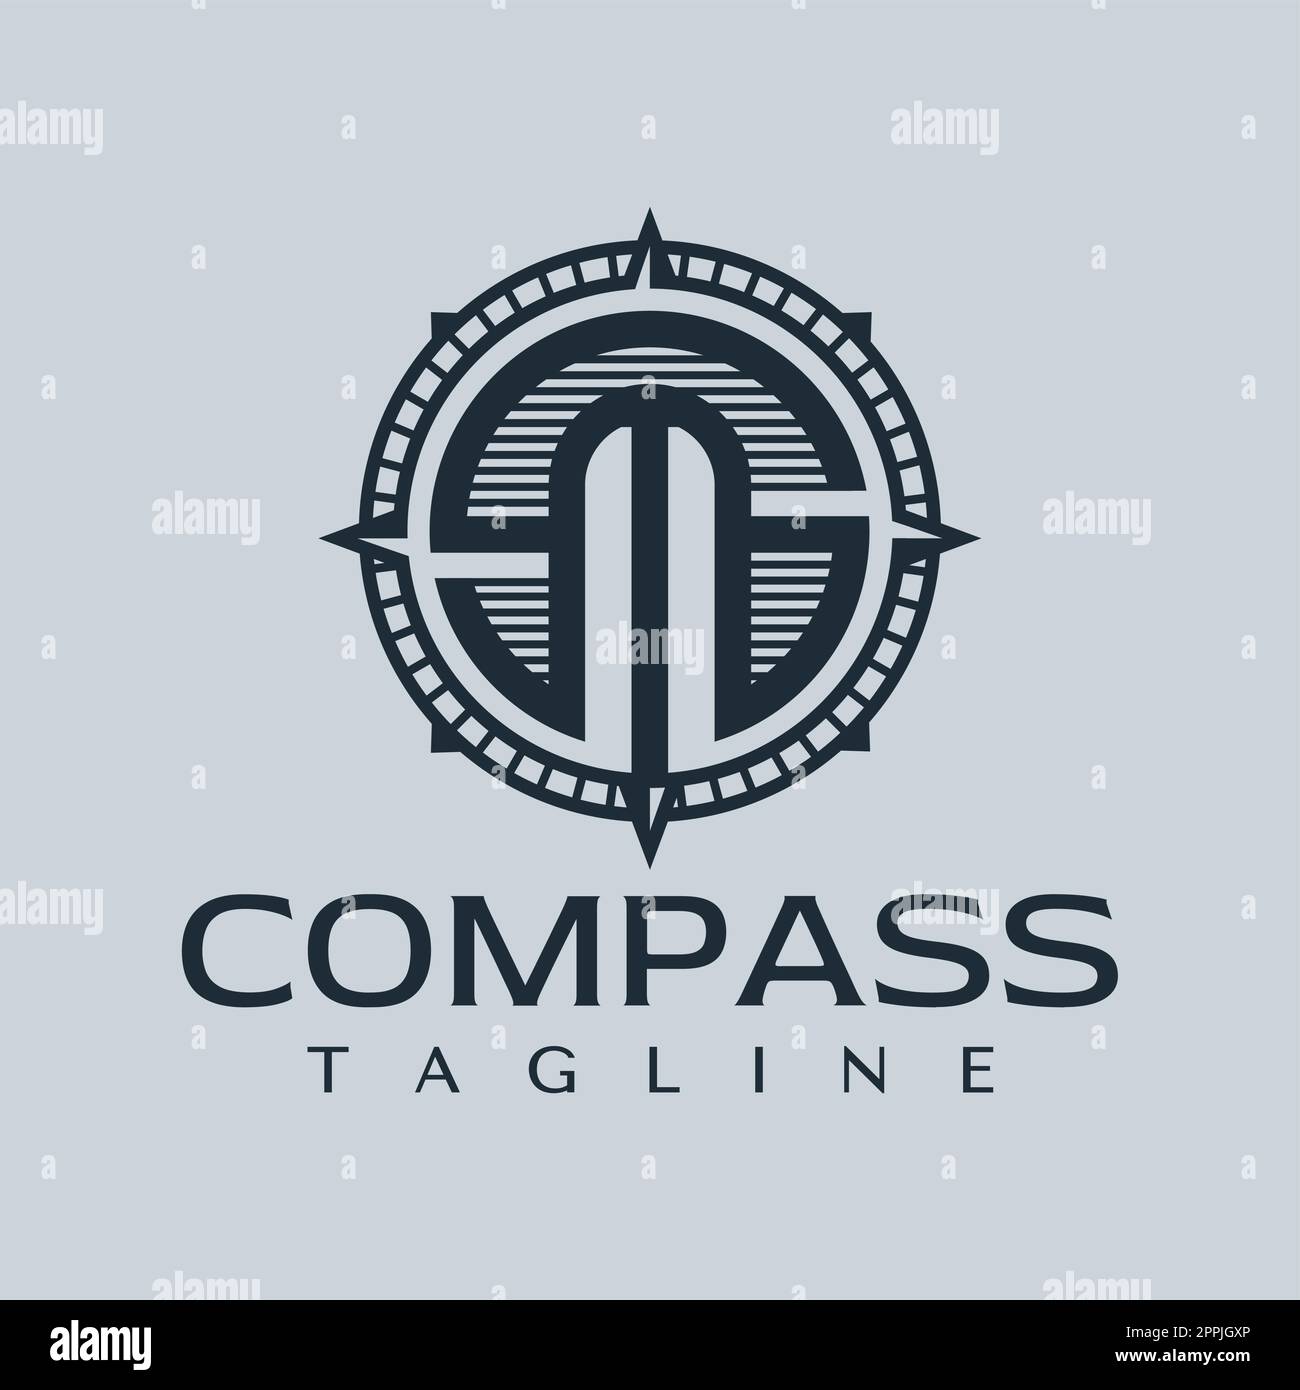 Compass Rose With Eight Abbreviated Initials Blue Navigation And  Orientation Symbol Stock Illustration - Download Image Now - iStock